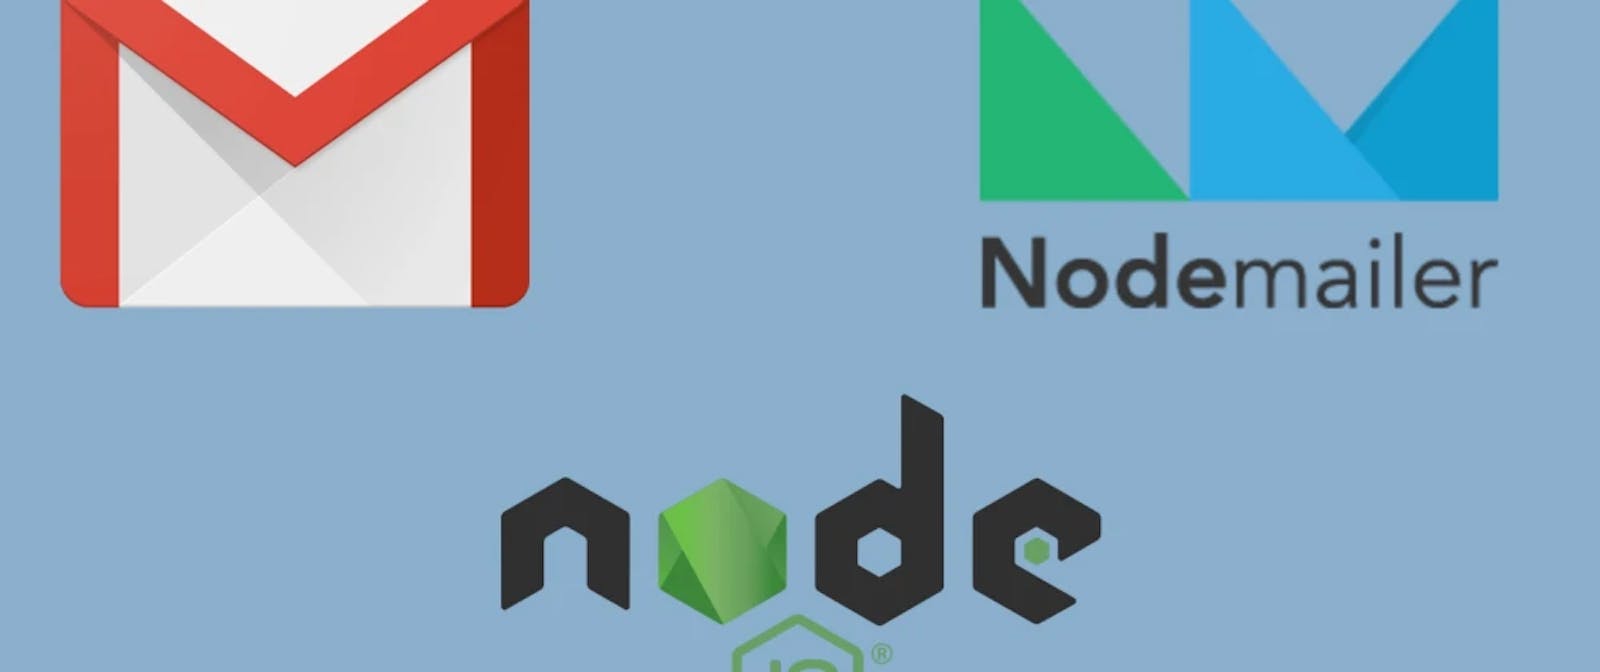 Email Sending  using NodeJS and Express